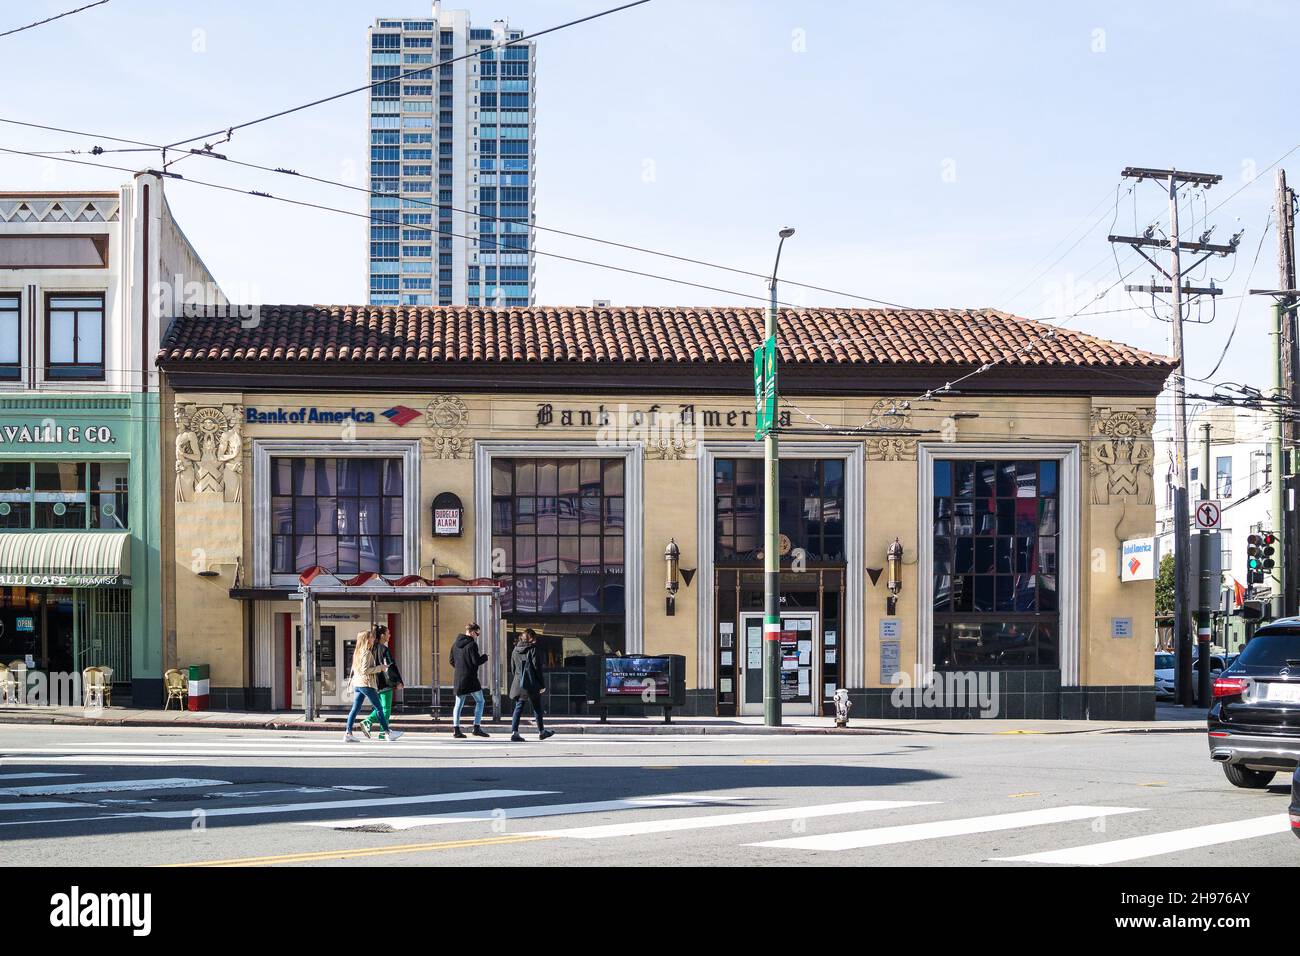 Bank of America at 1455 Stockton St, San Francisco, CA 94133 A historic Mediterranean revival and art deco style building in North Beach Stock Photo